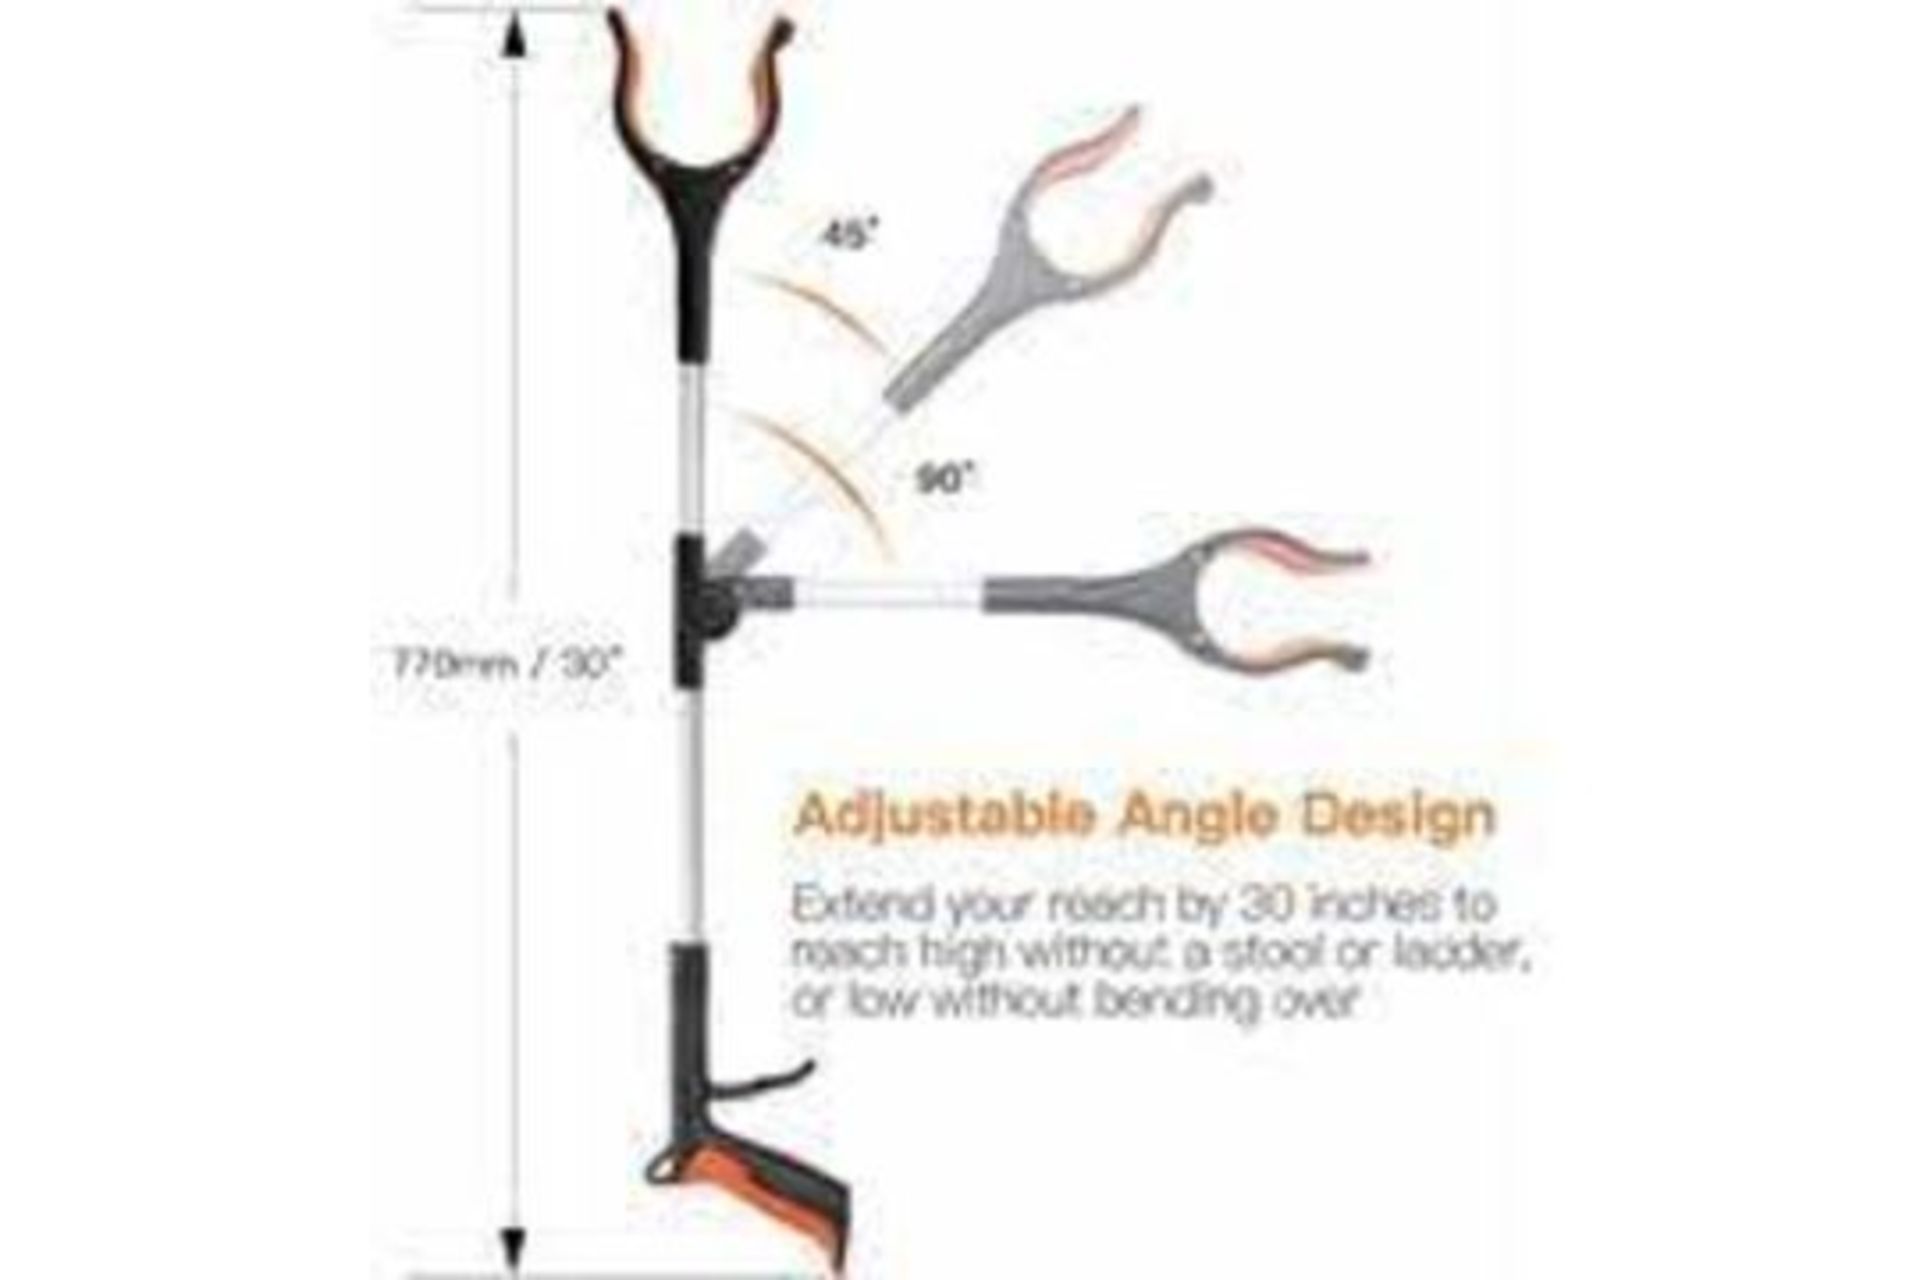 10 x NEW PACKAGED TACKLIFE Upgrade Reacher Grabber Tool, 0°-180° Angled Arm, 90° Rotating Head- - Image 2 of 2